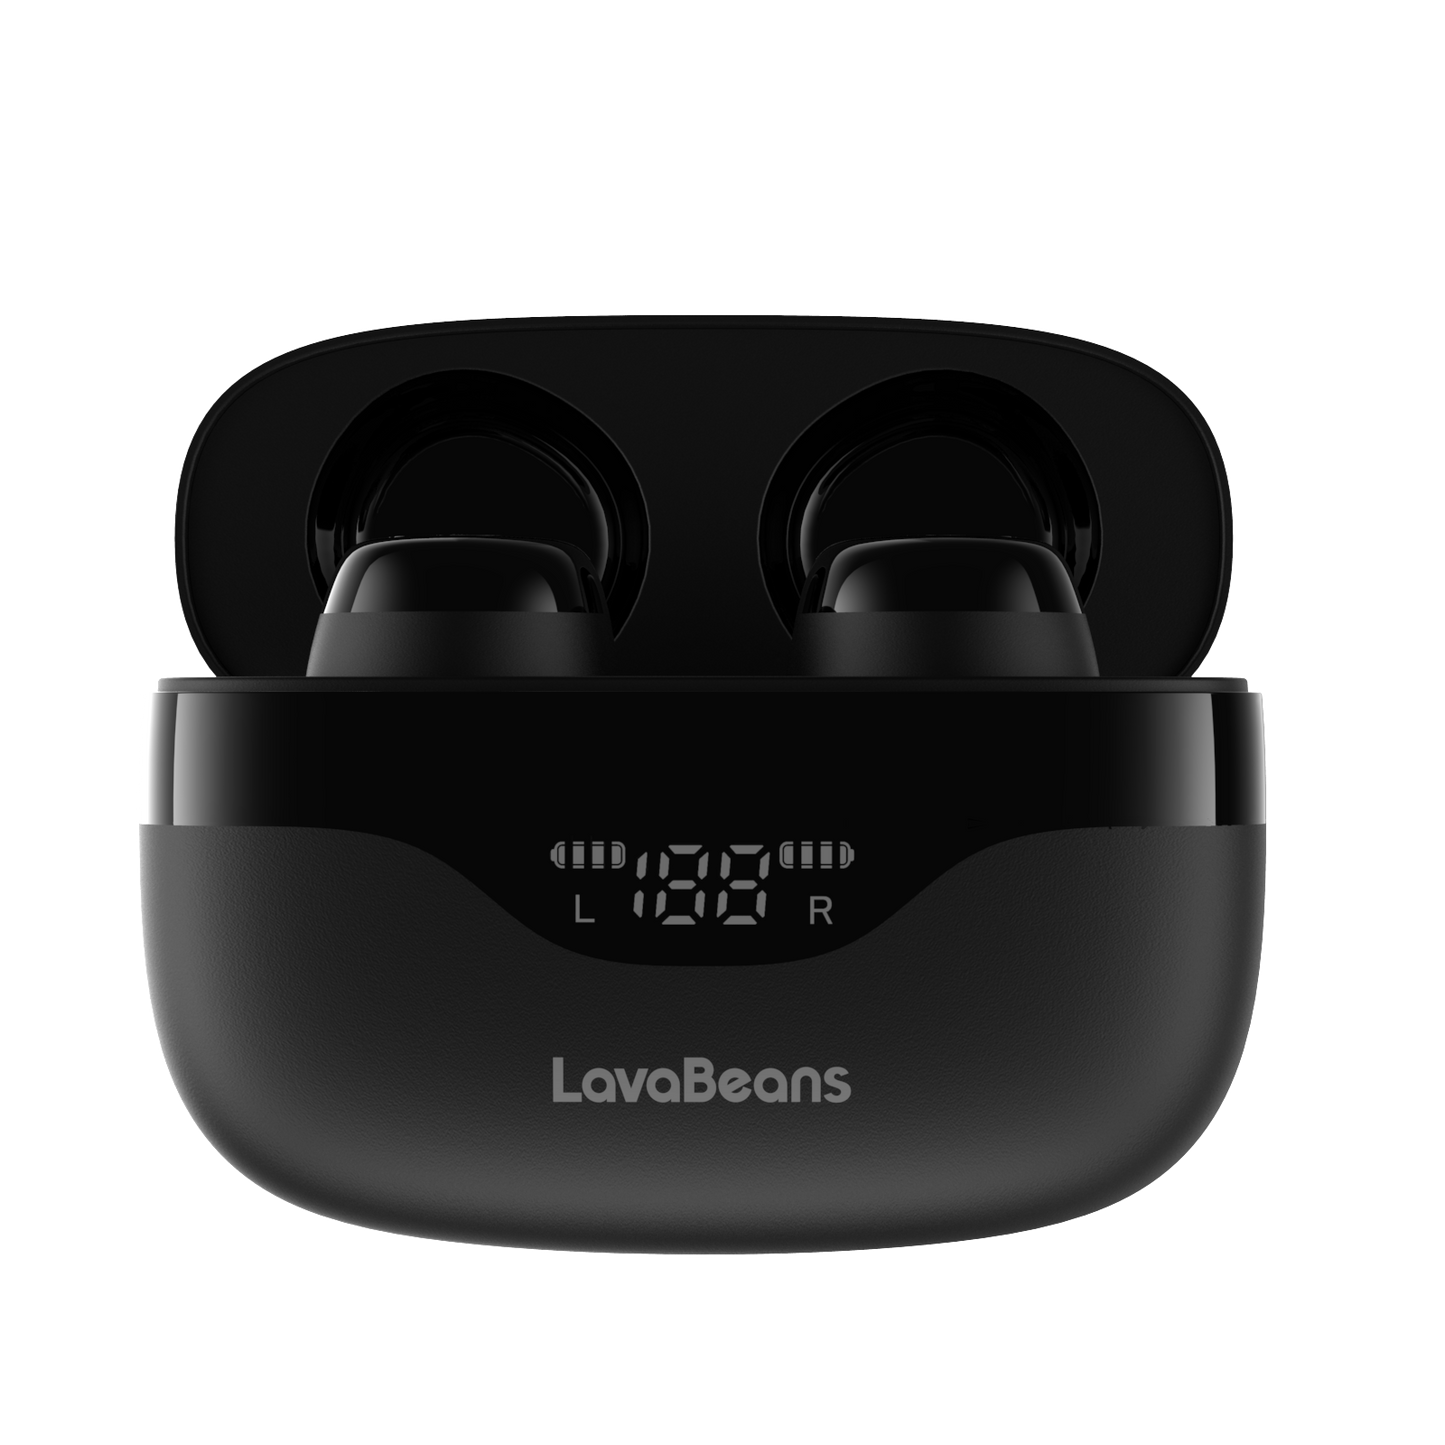 LavaBeans True Wireless Earbud Bluetooth 5.0 Stereo Bass Touch control In-Ear Headphones